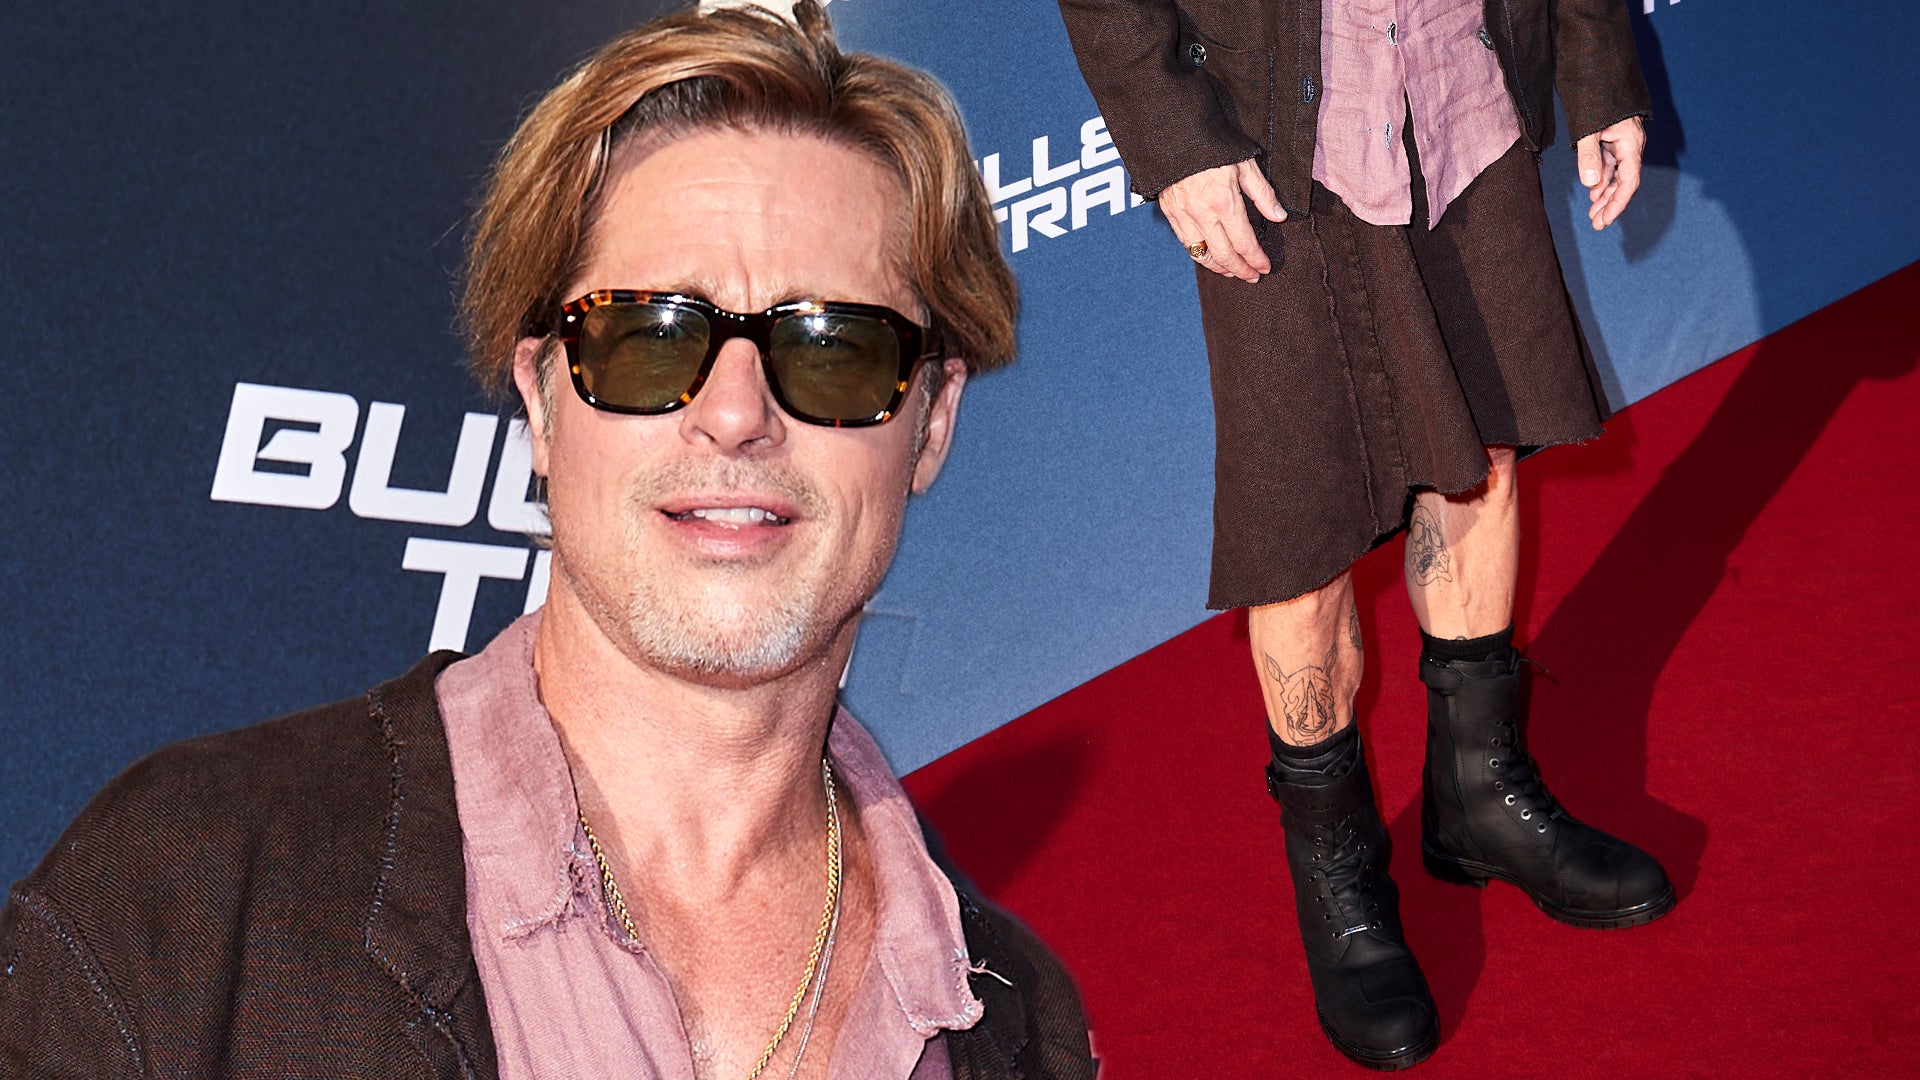 Brad Pitt launches clothes inspired by red carpet looks